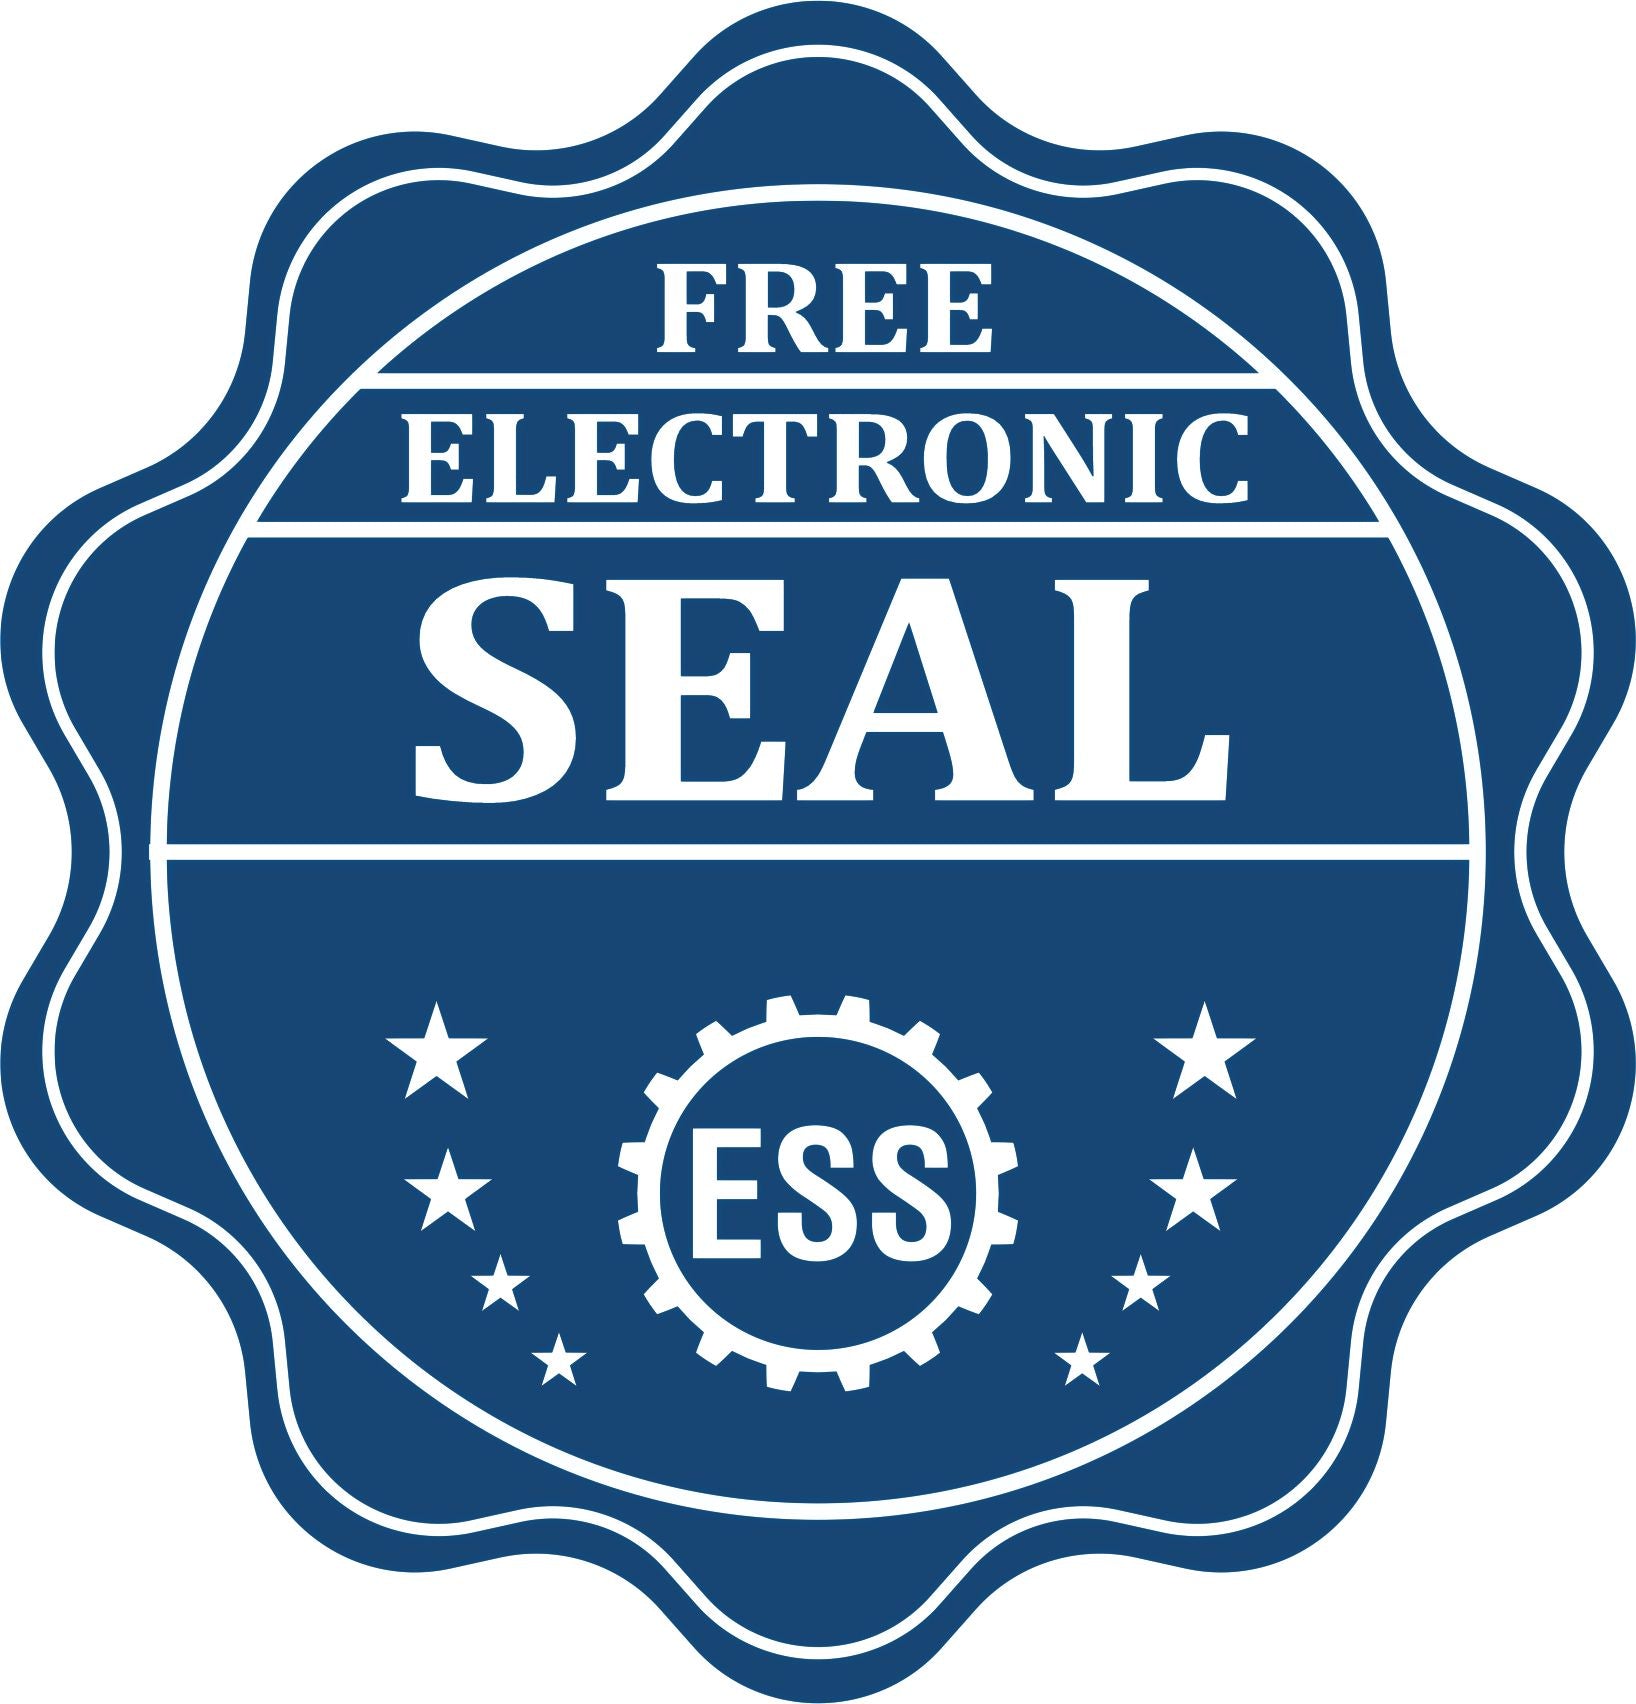 A badge showing a free electronic seal for the Heavy Duty Cast Iron Maine Land Surveyor Seal Embosser with stars and the ESS gear on the emblem.